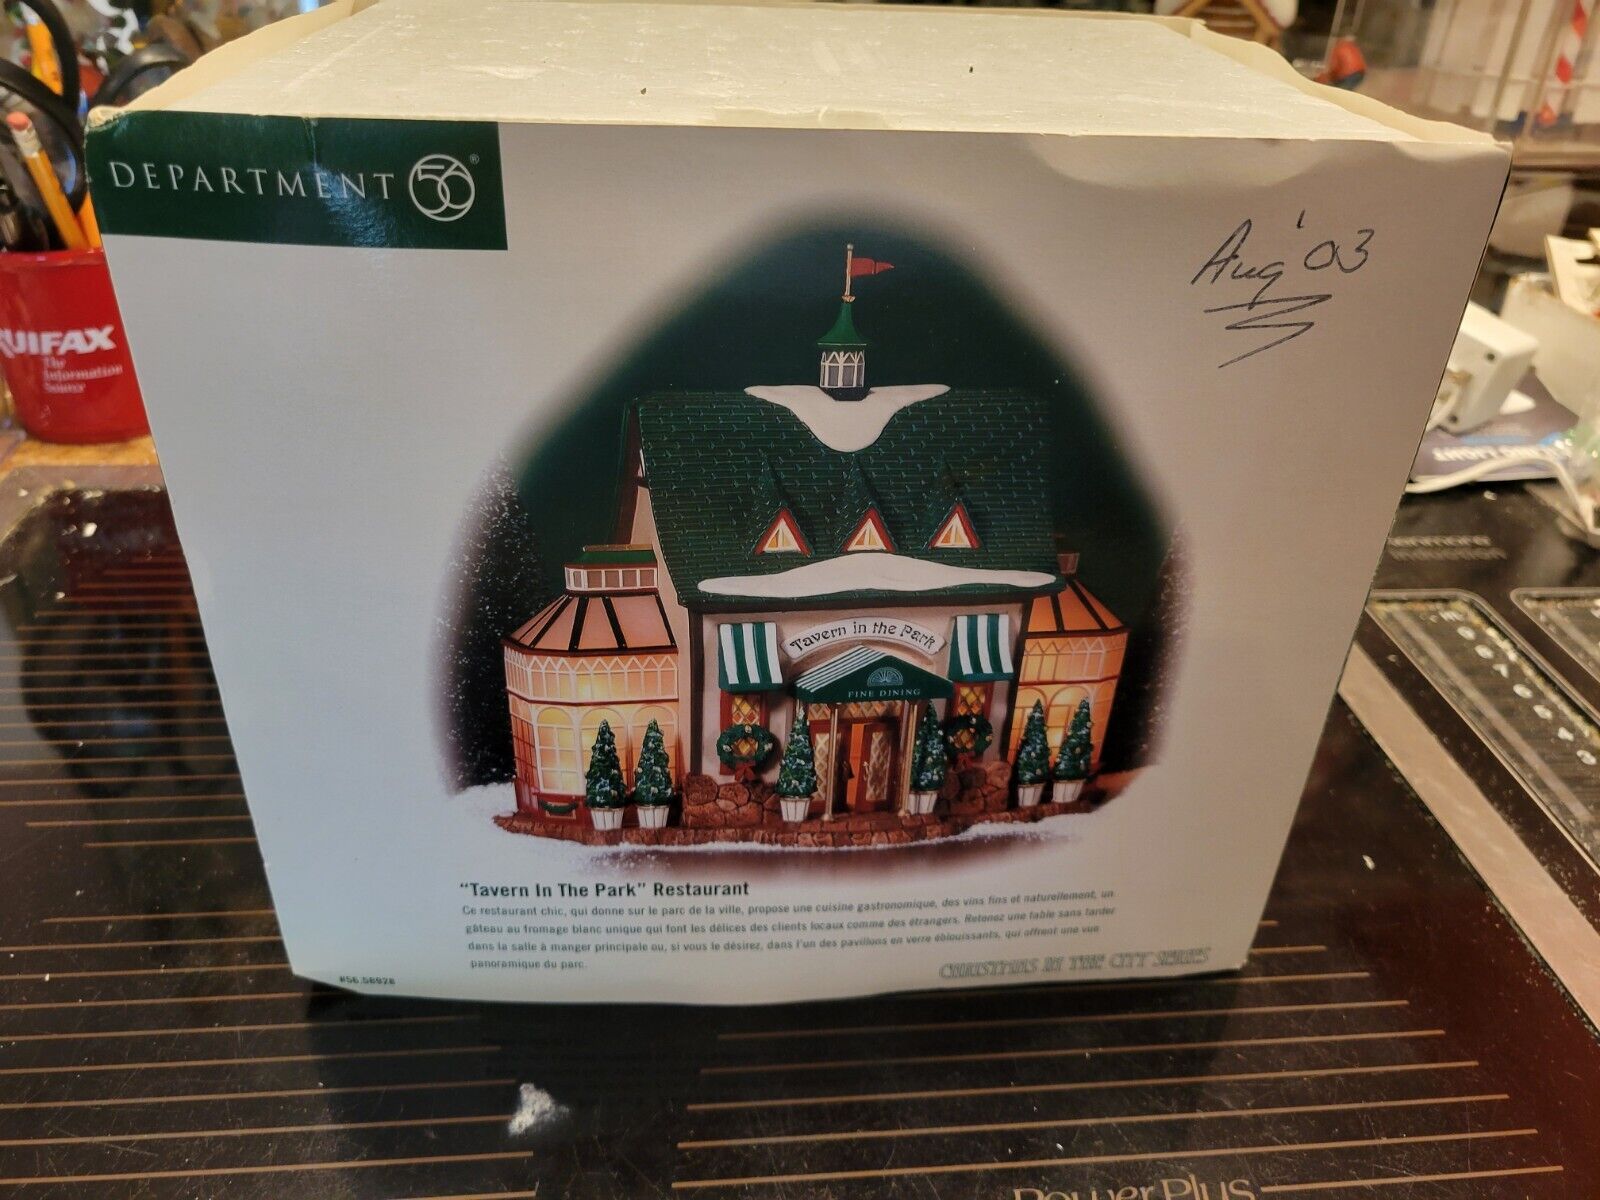 Dept 56 Christmas in the City Tavern in the Park - New